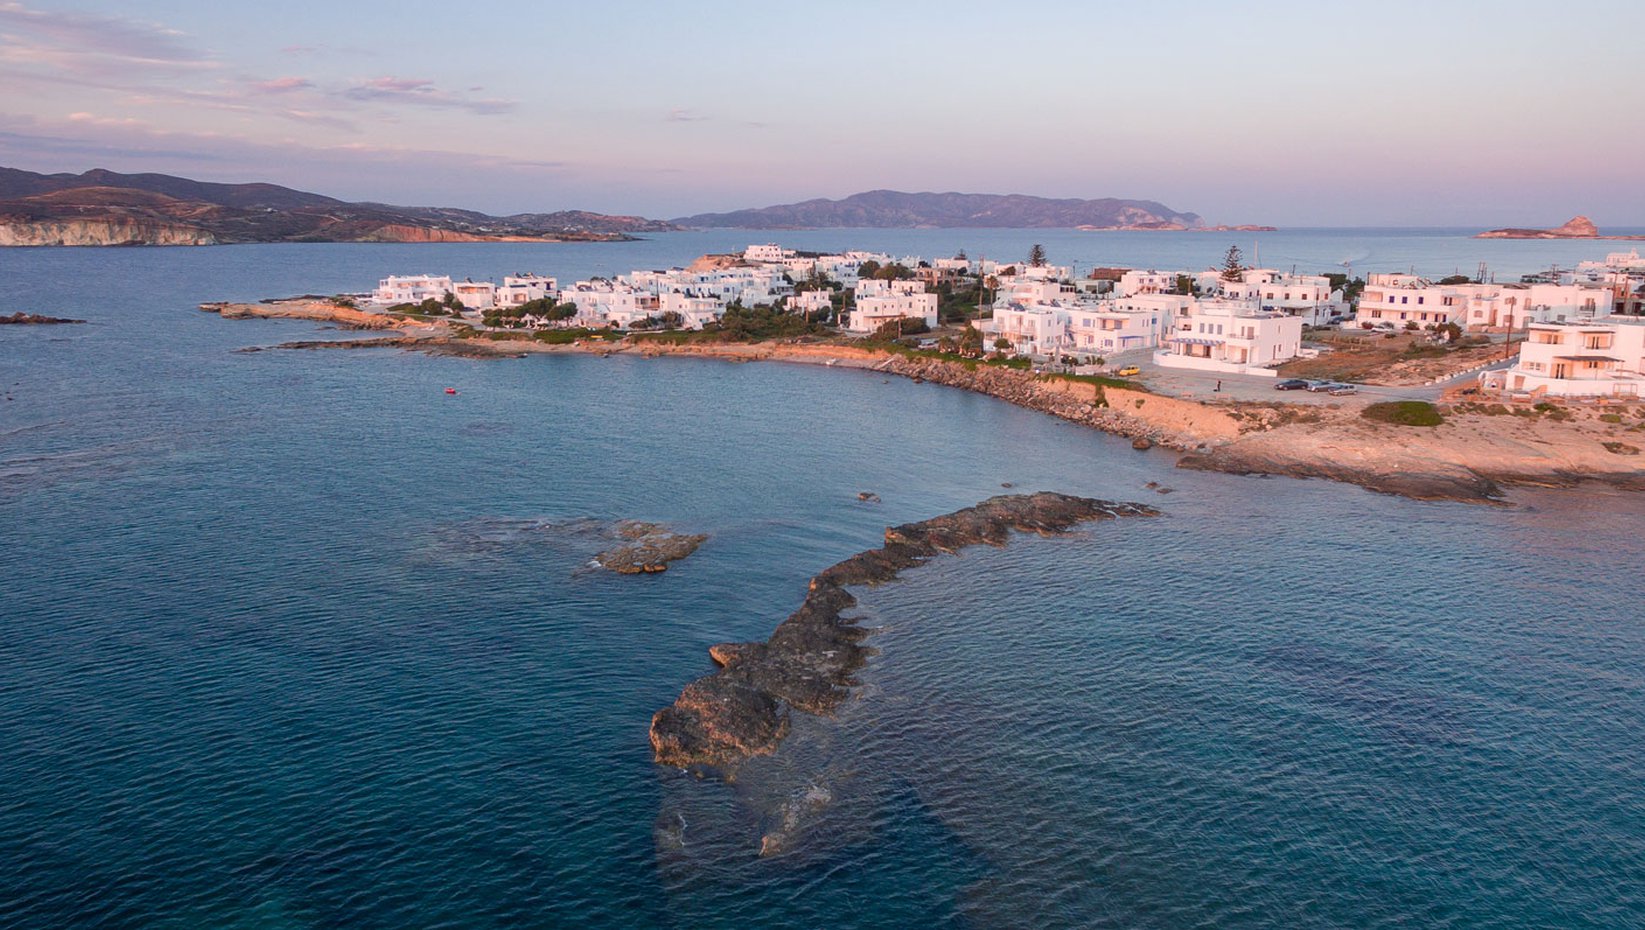 Pollonia vilage in Milos island in the afternoon, drone view.